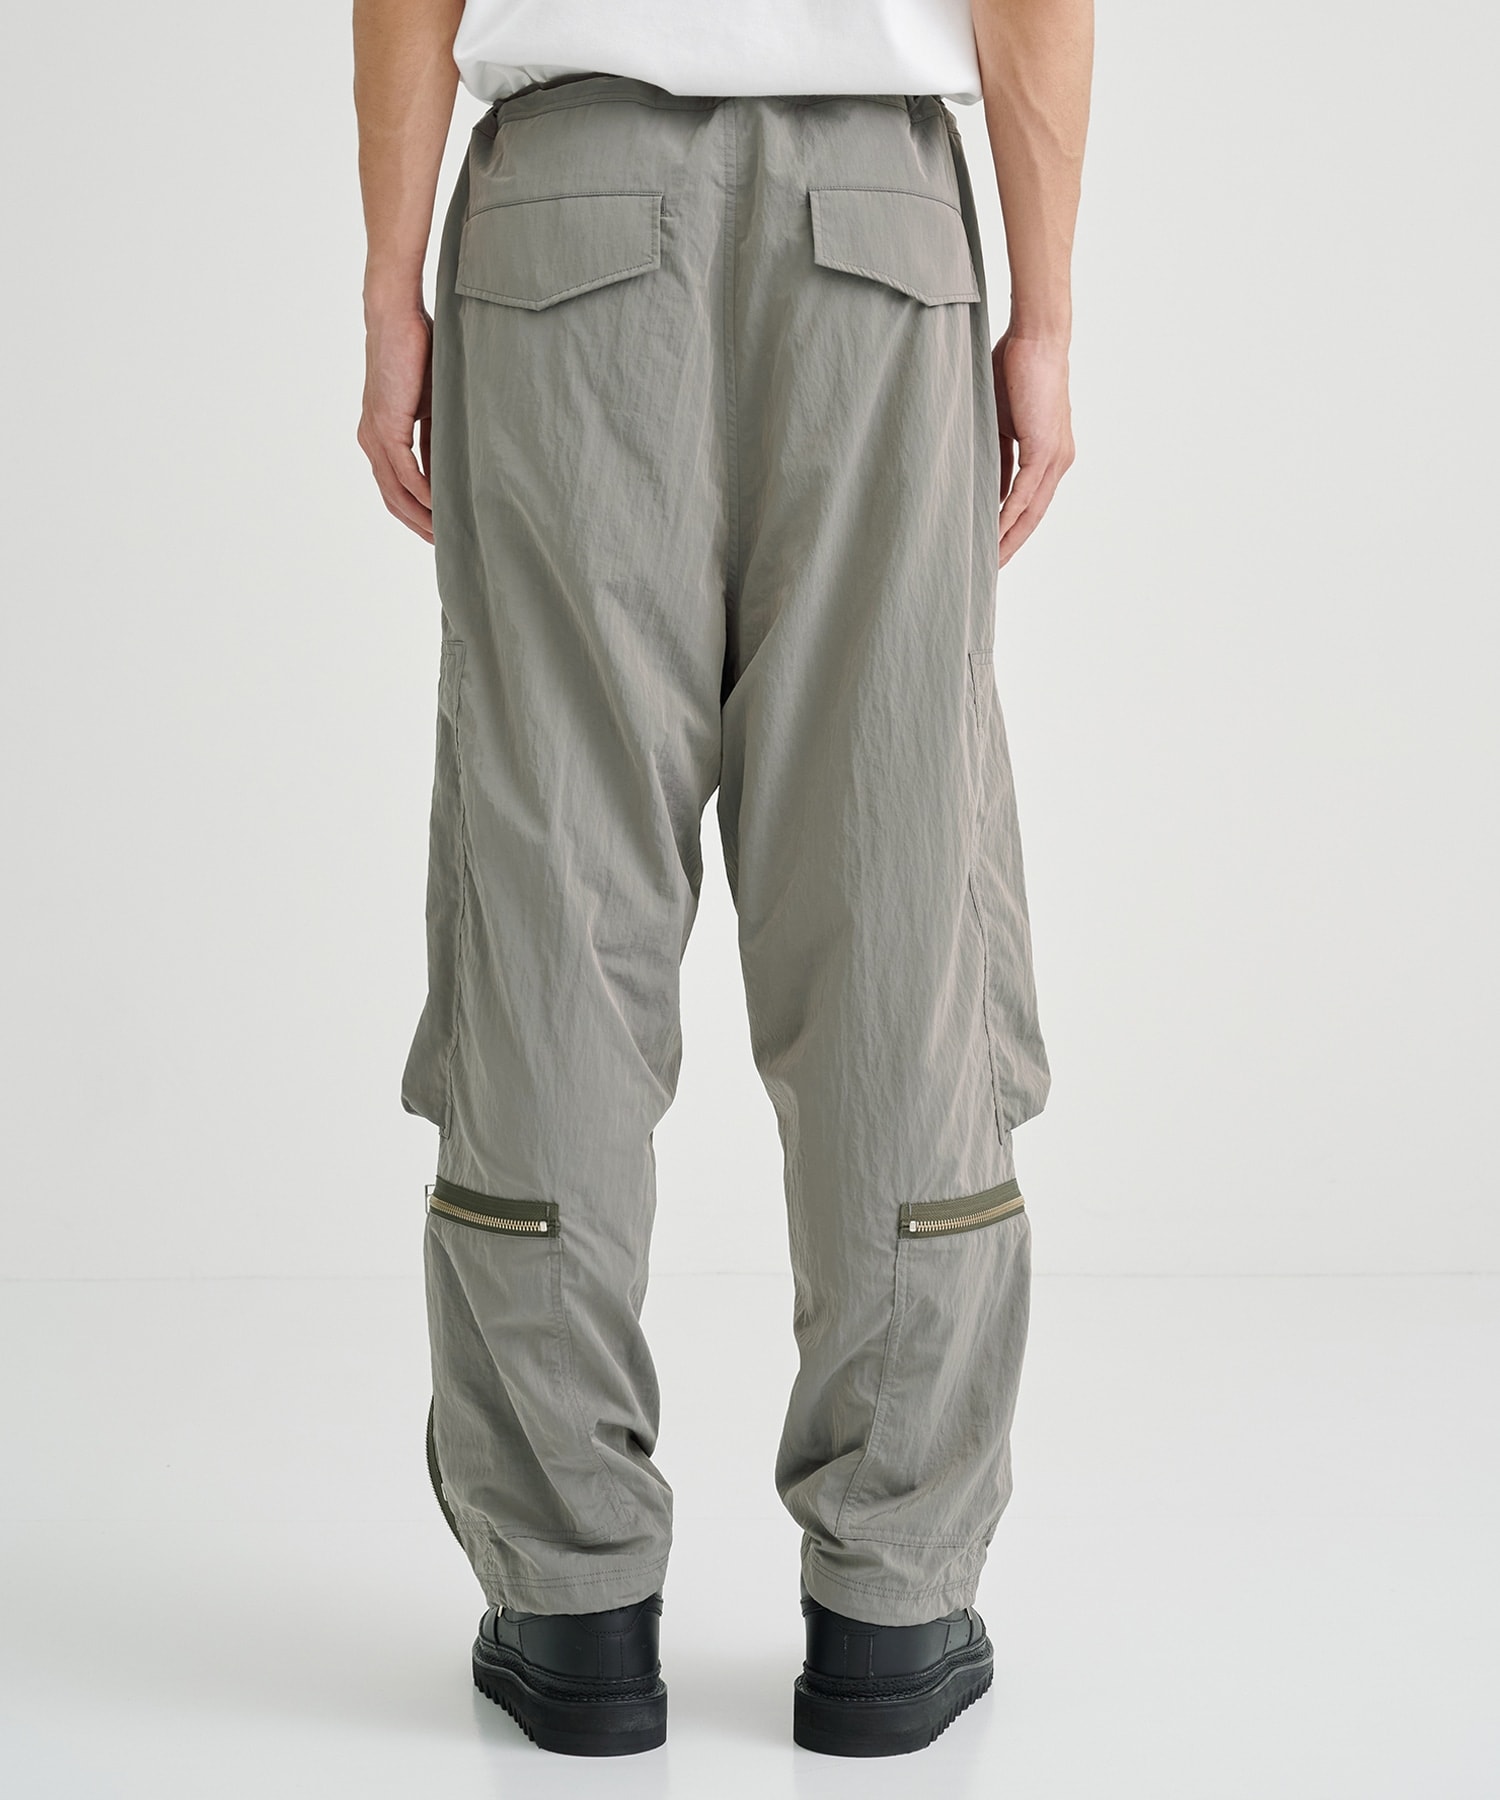 Cargo Pants | BED J.W. FORD